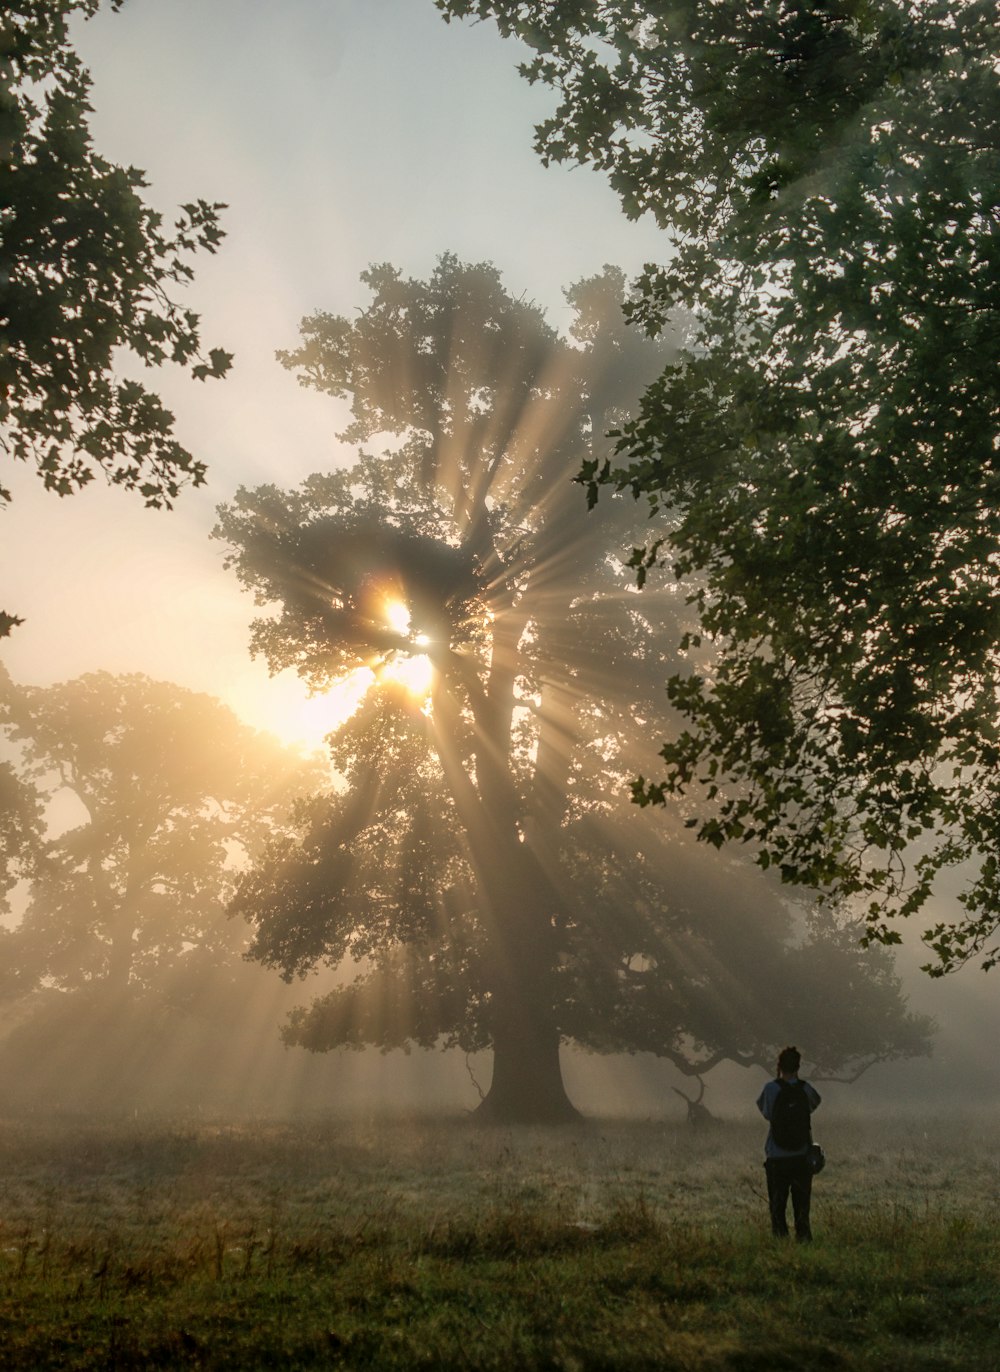 a person standing in a field with trees and fog